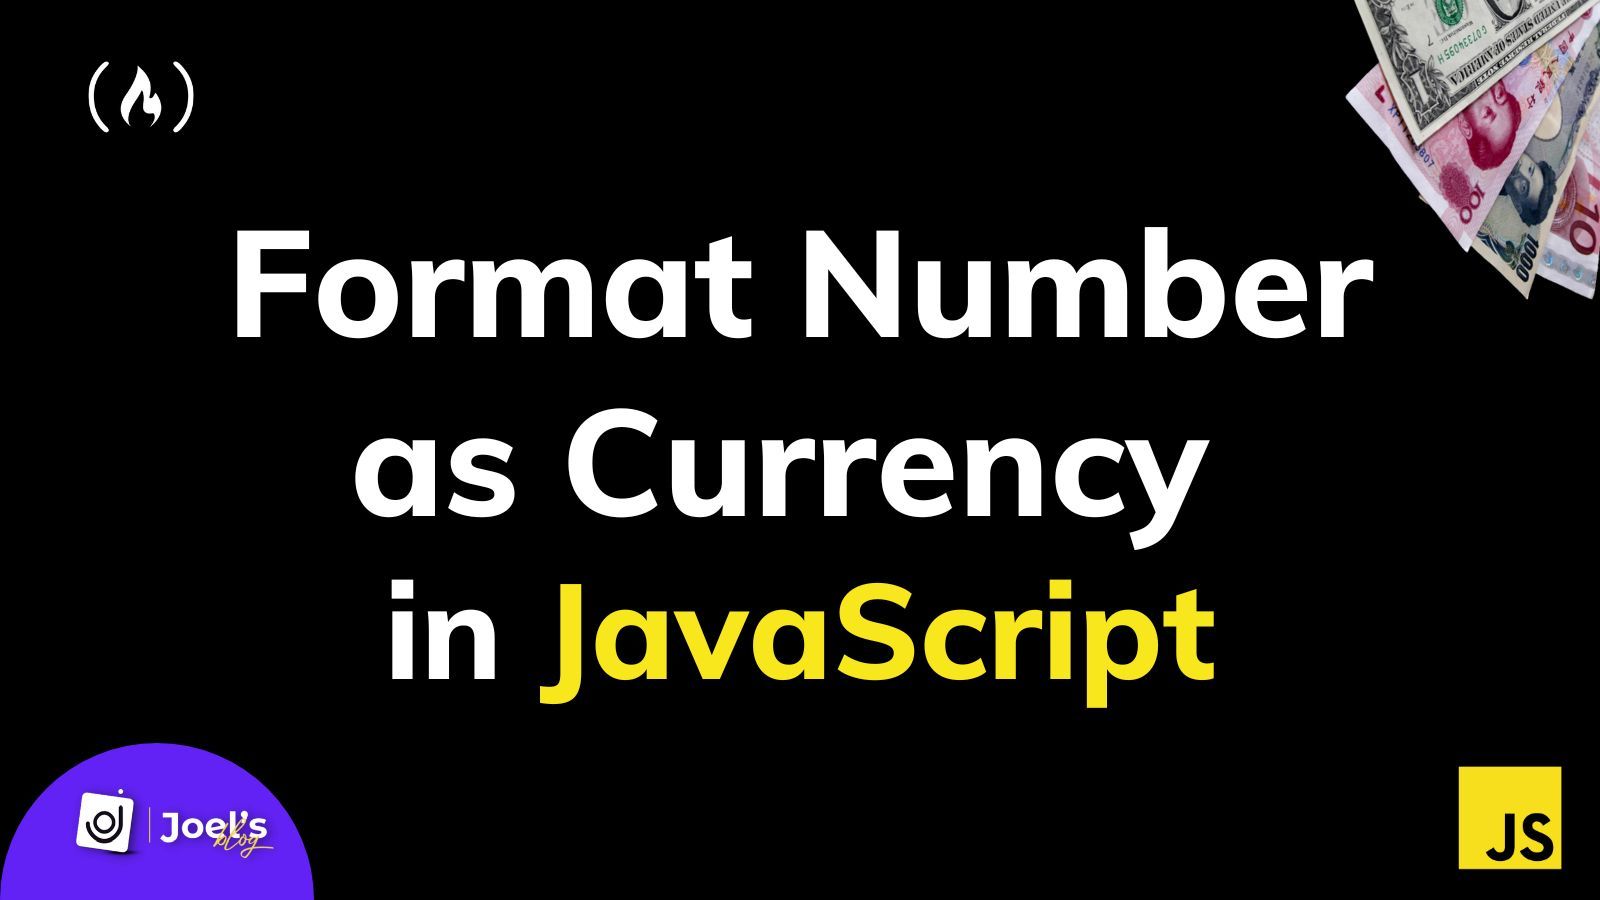 How to Format a Number as Currency in JavaScript